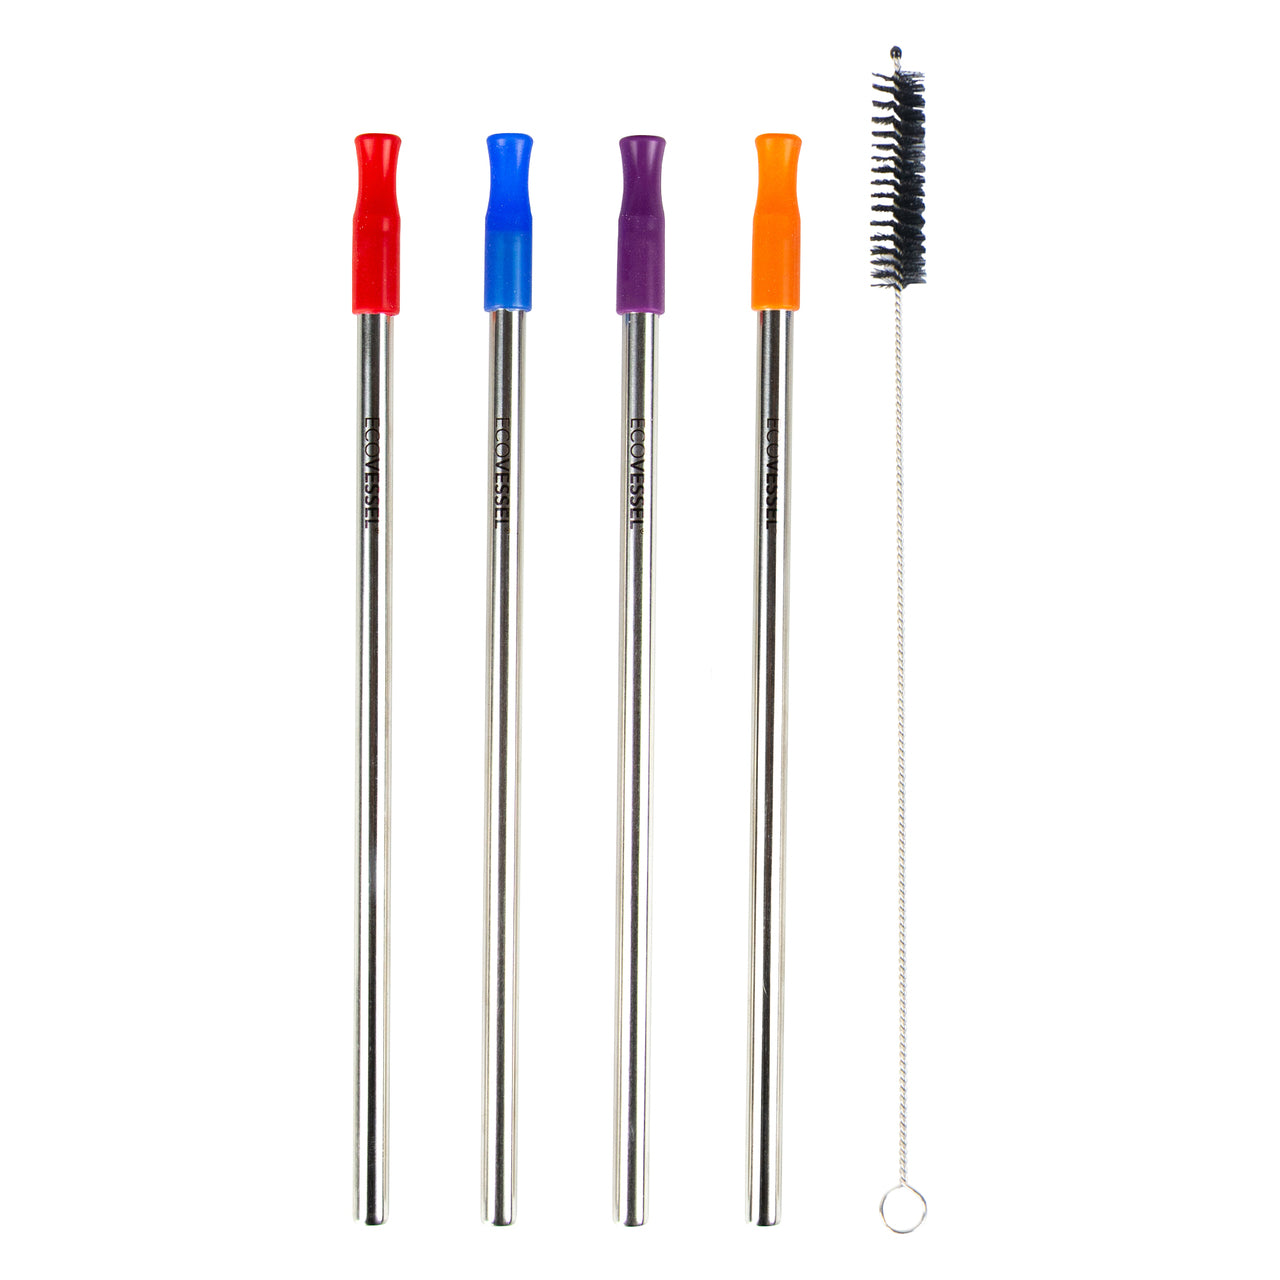 Shop for PAN [5-Pack] Replacement Straw and Straw Brushes for Hydro Flask  Wide Mouth Straw Lid, BPA Free, 5 Straws and 5 Straw Cleaning Brushes Set  at Wholesale Price on